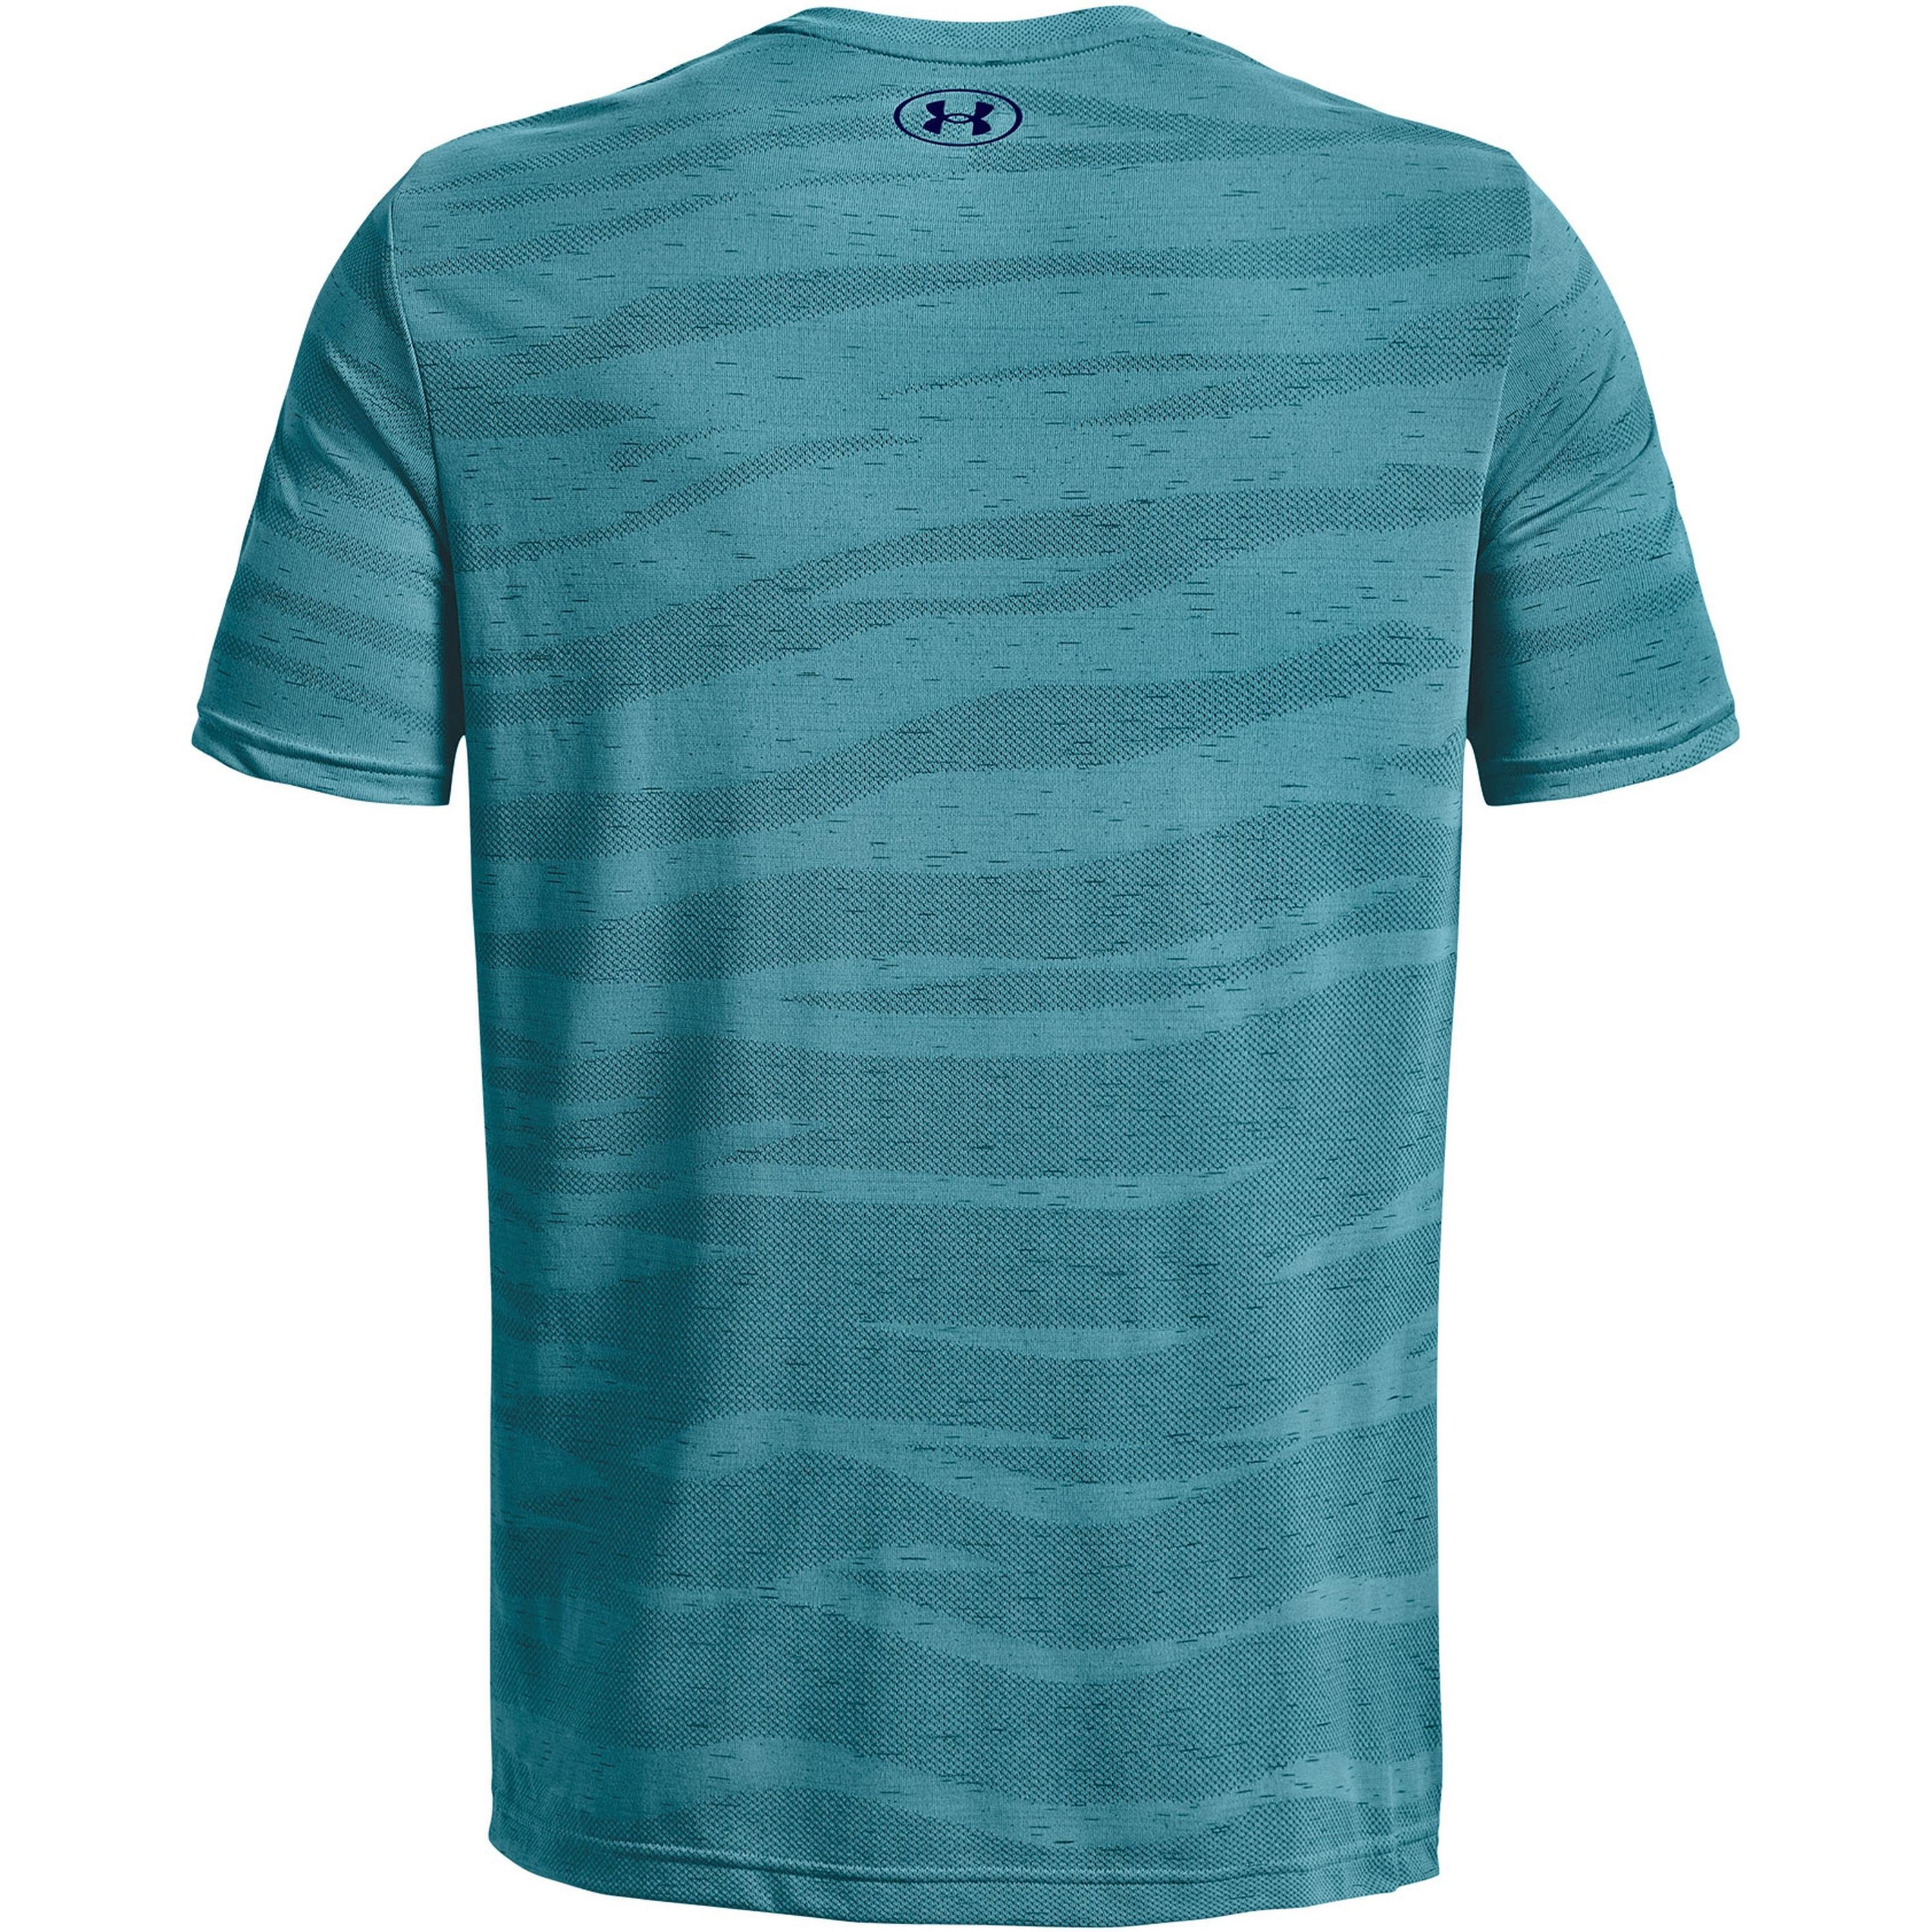 Under Armour® Seamless Funktionsshirt glacierblue-sonarblue